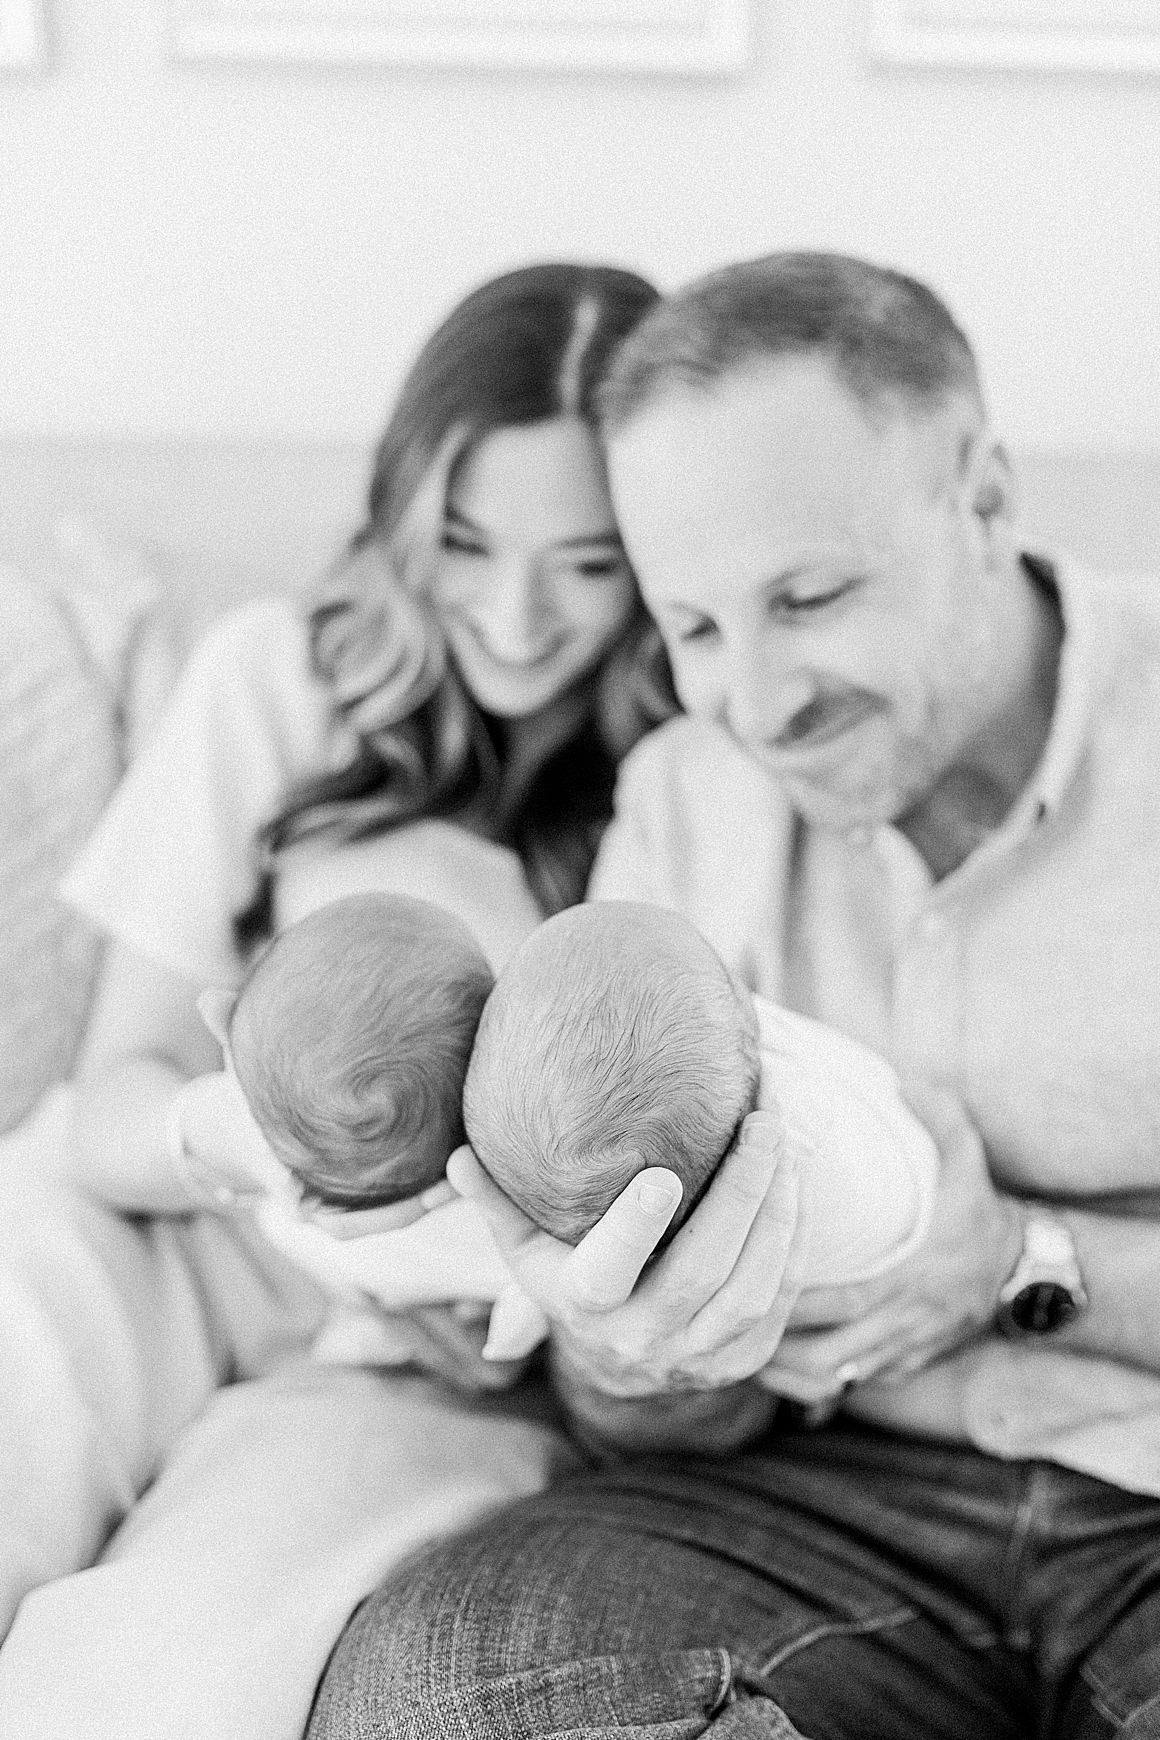 Black and white lifestyle newborn photo. Photos by Caitlyn Motycka Photography.